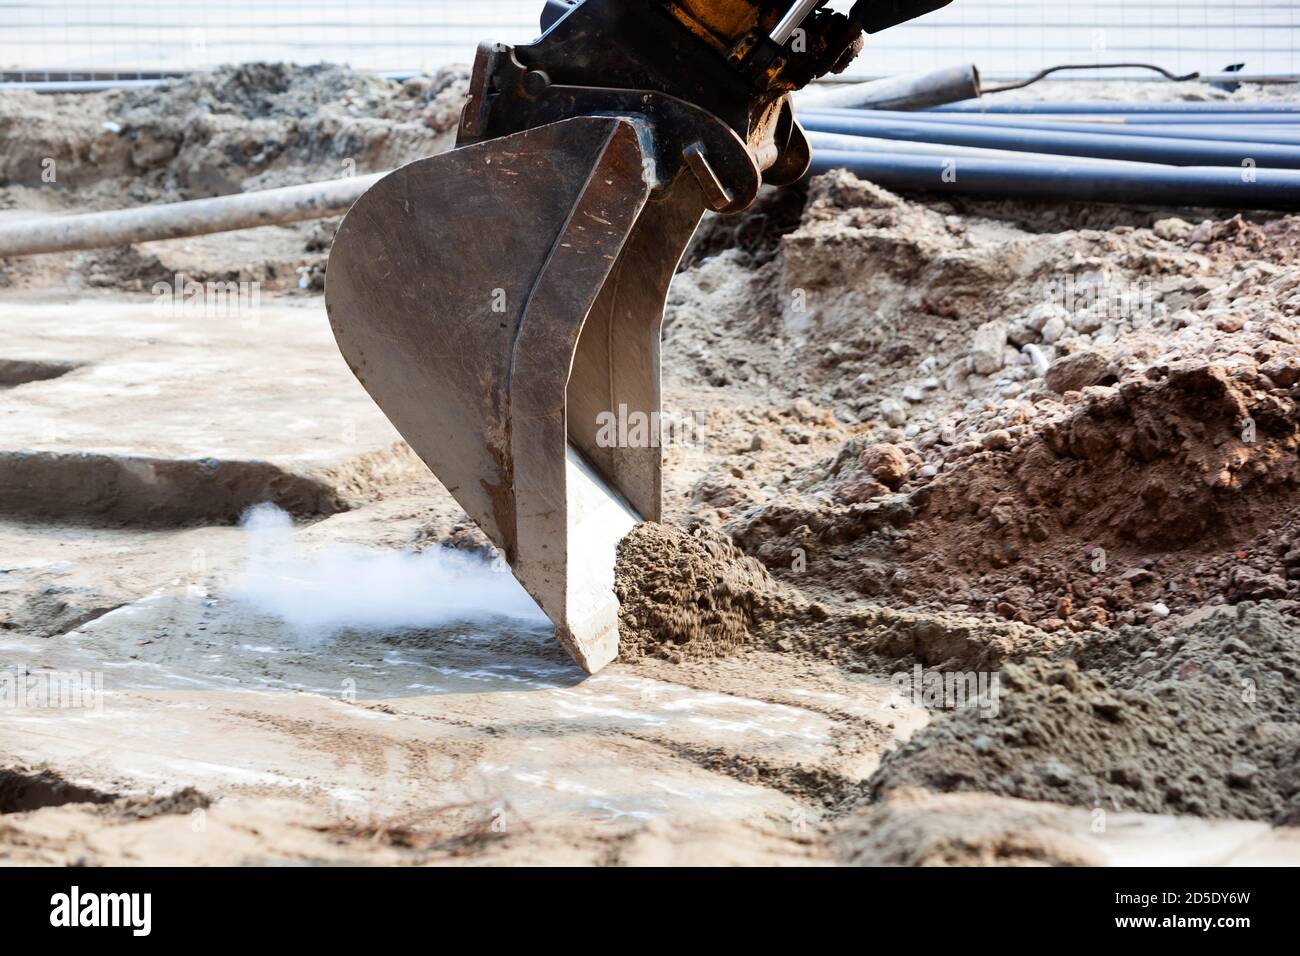 Closeup of an excavator producing smoke while scraping sand from concrete on an construction site Stock Photo